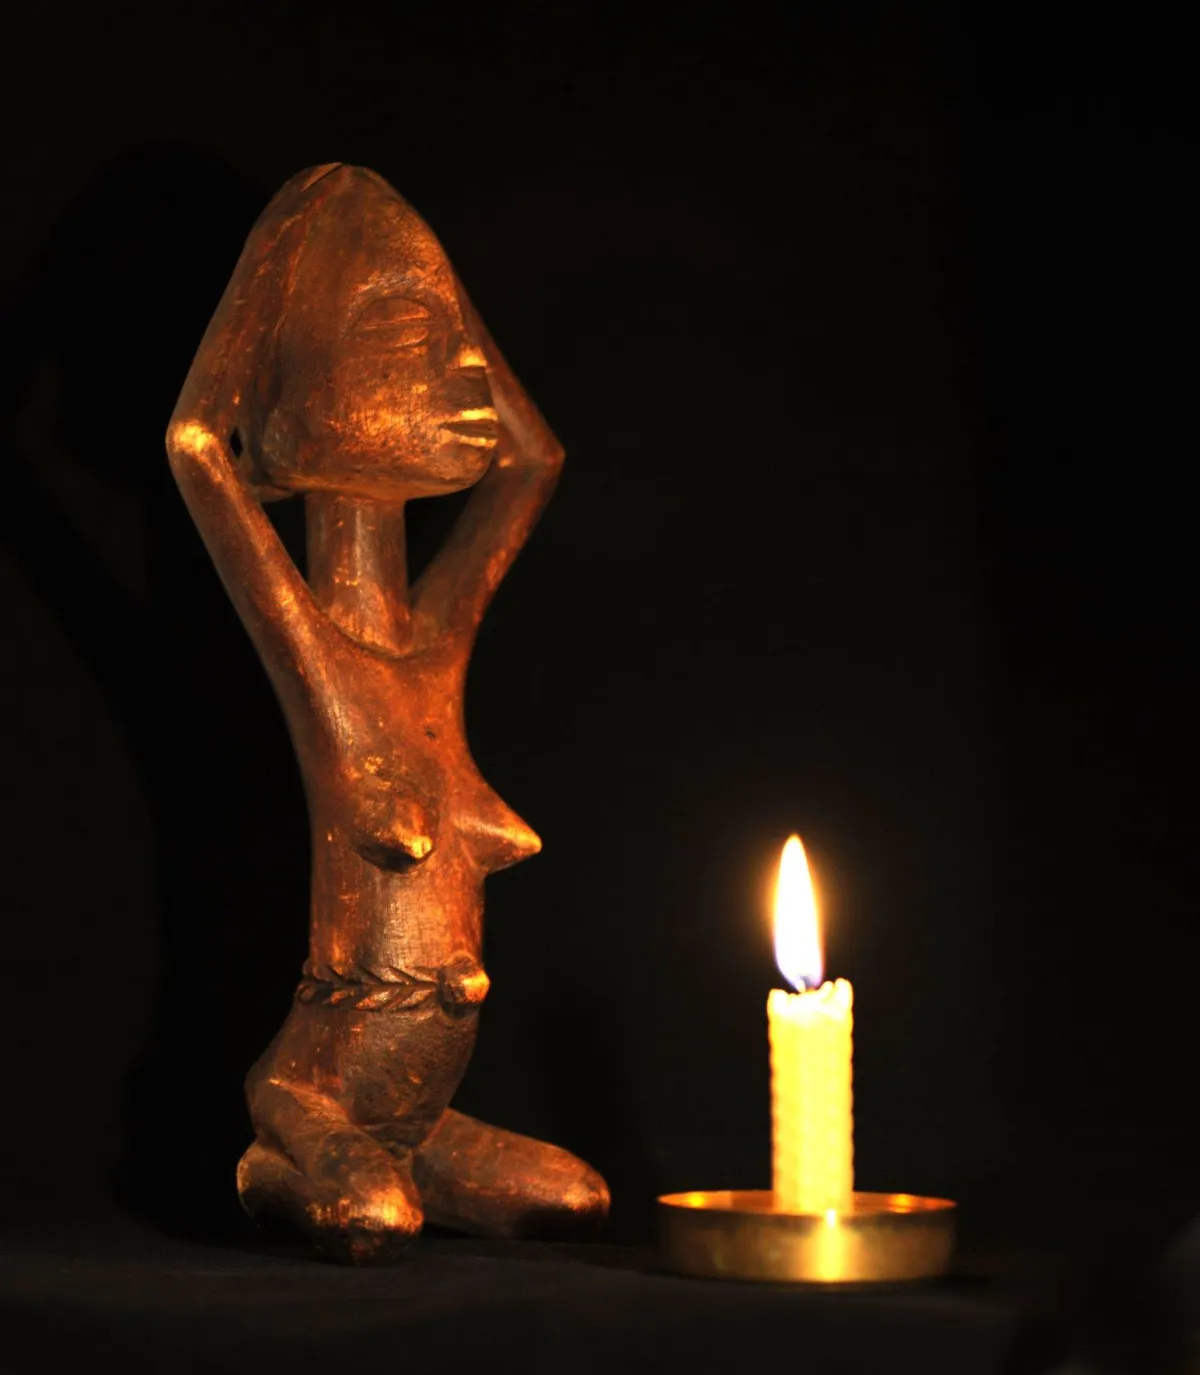 Female statuette kneeling in front of a lit candle.